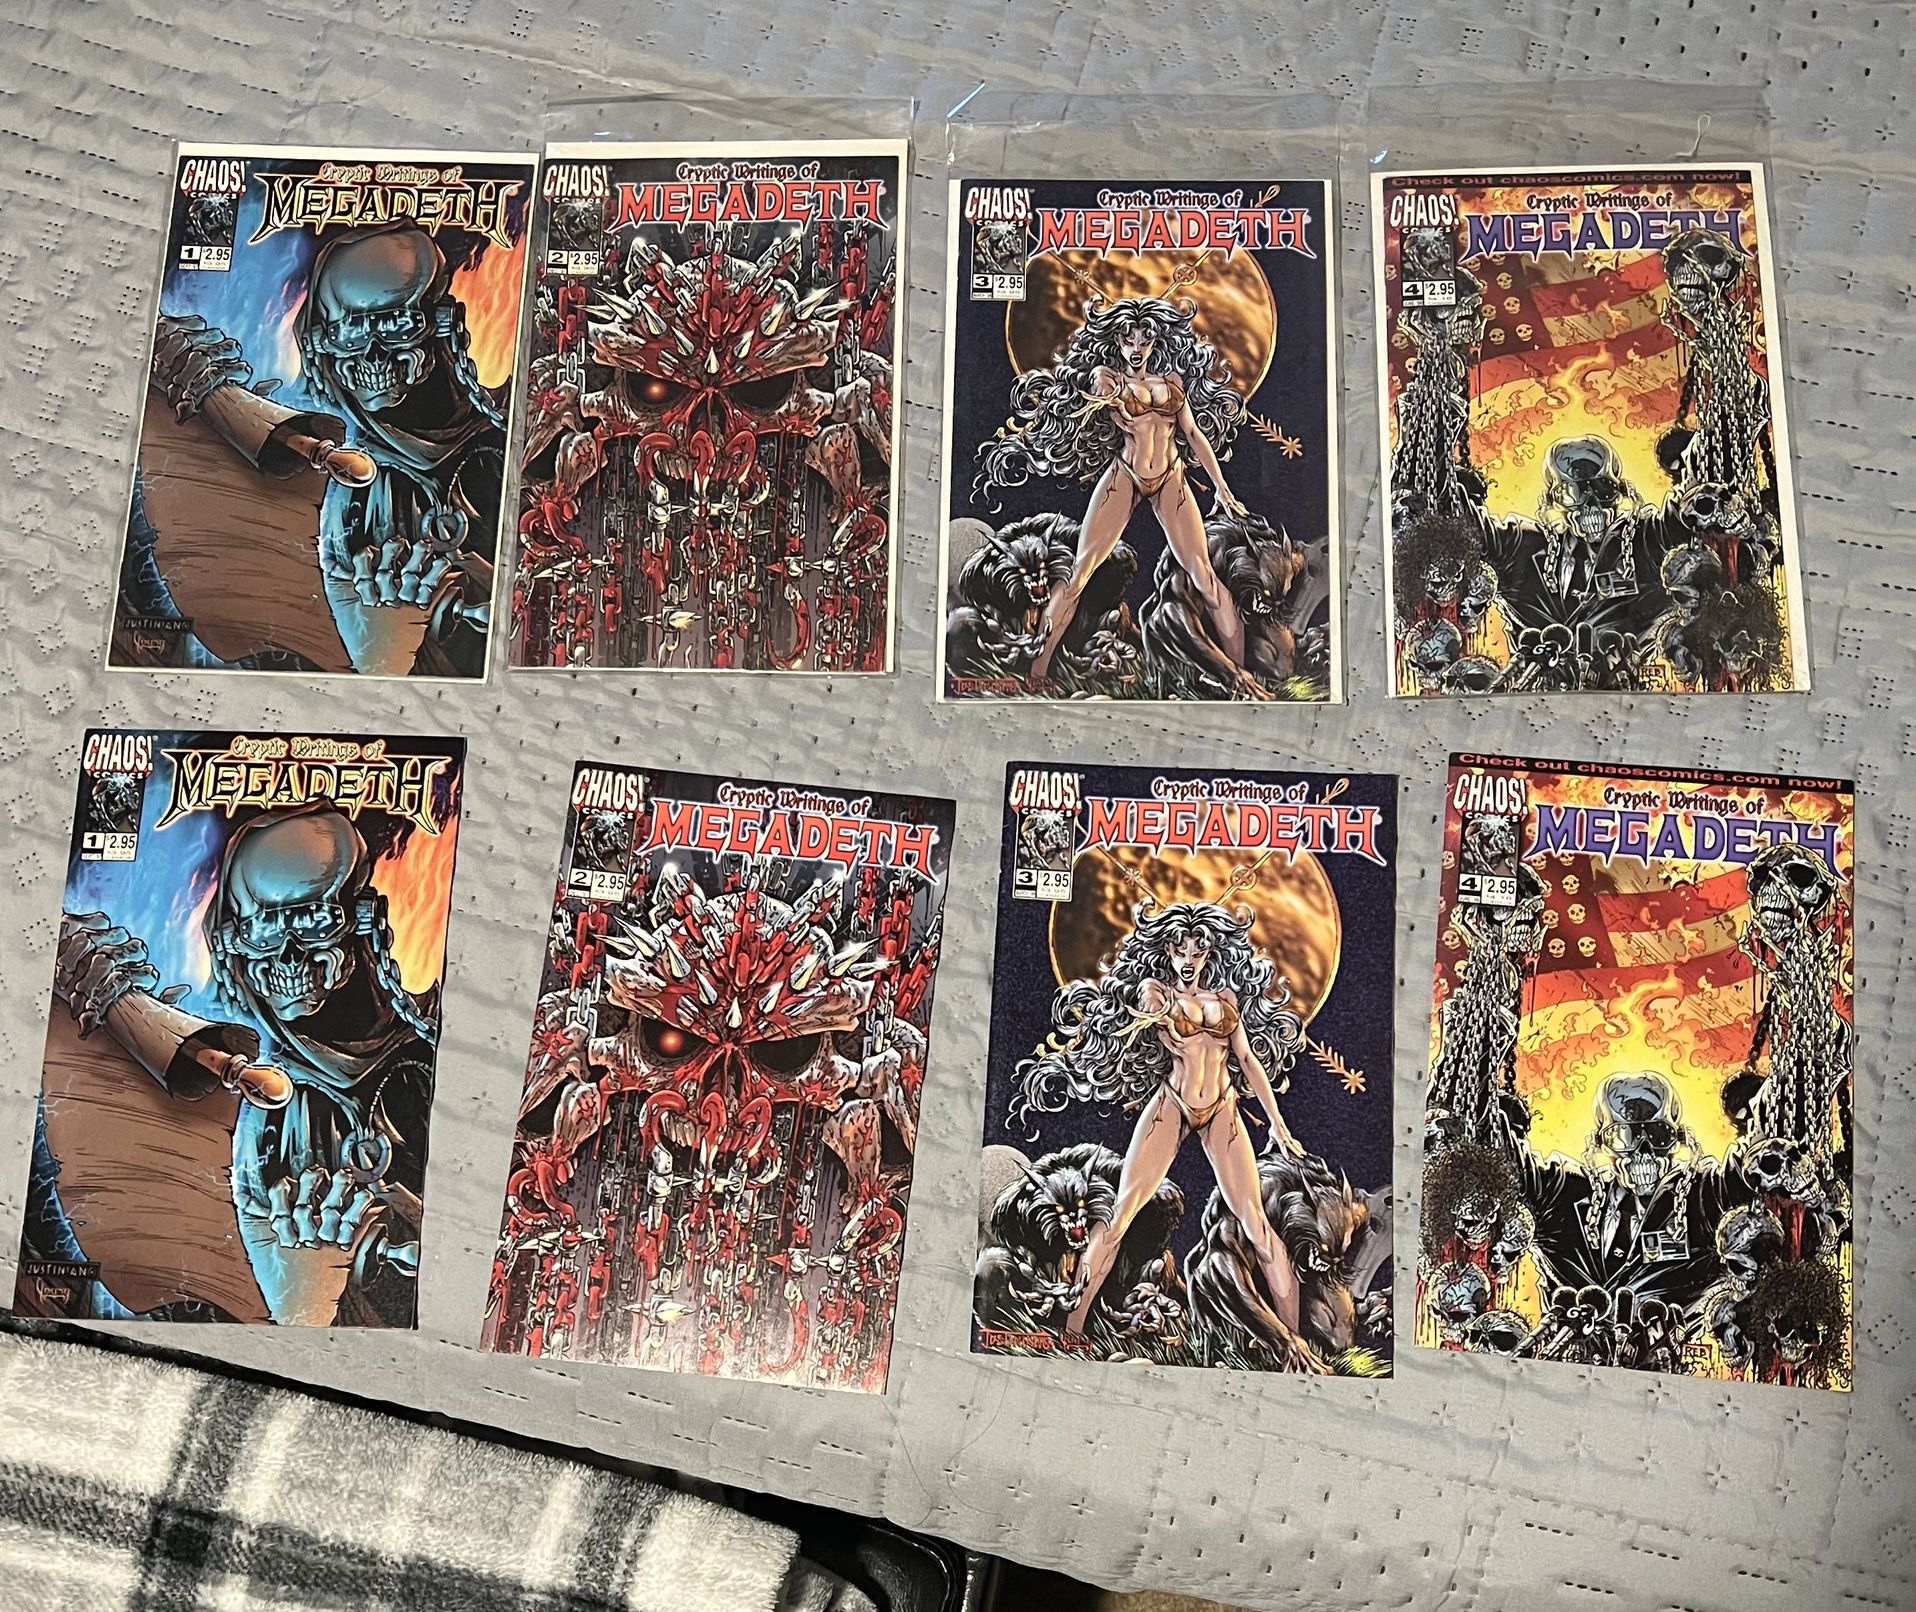 CHAOS COMICS CRYPTIC WRITINGS OF MEGADETH TWO COMPLETE SETS